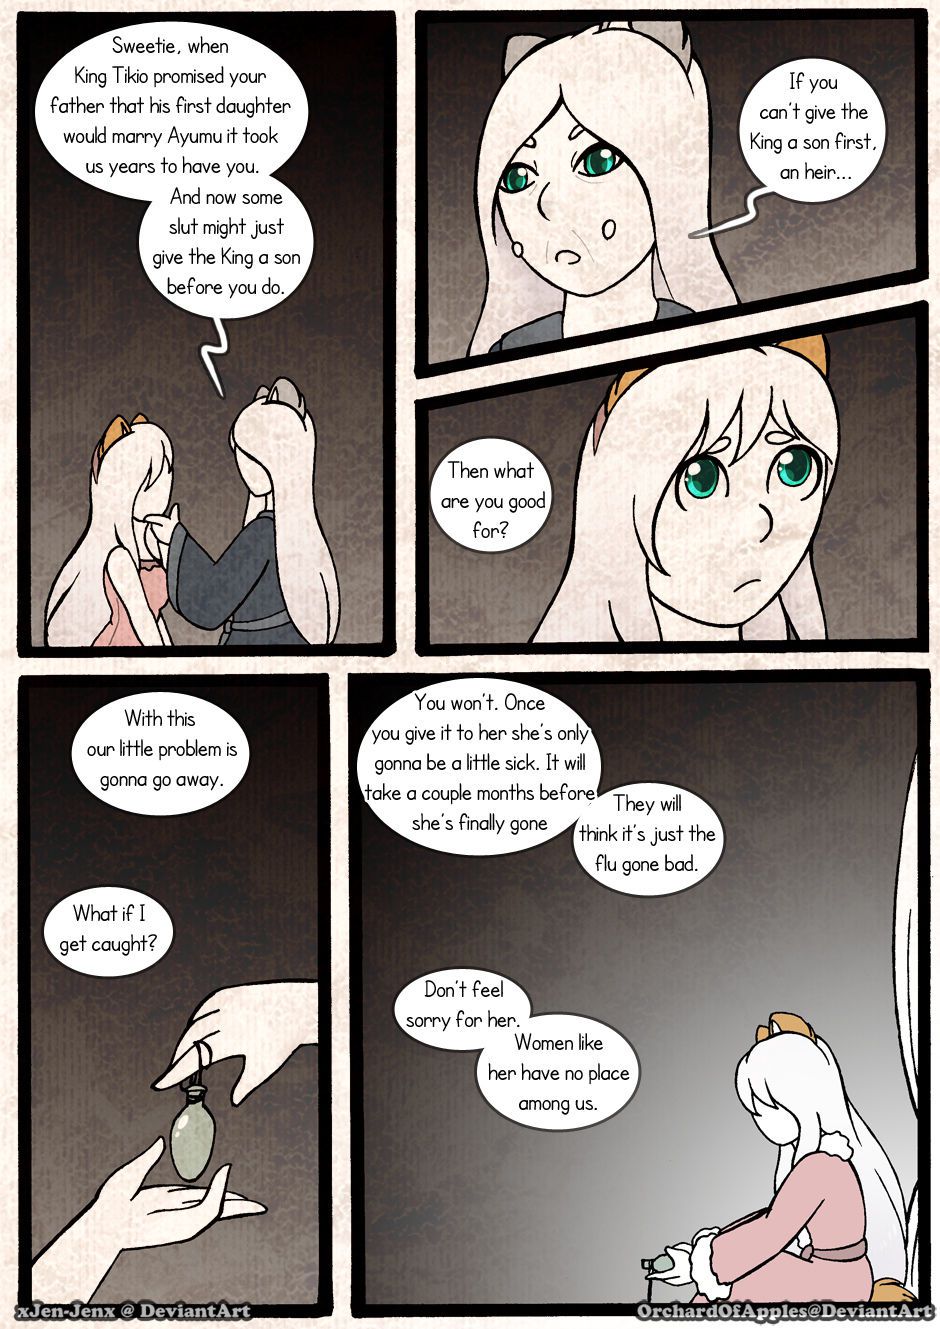 [Jeny-jen94] Between Kings and Queens [Ongoing] 206